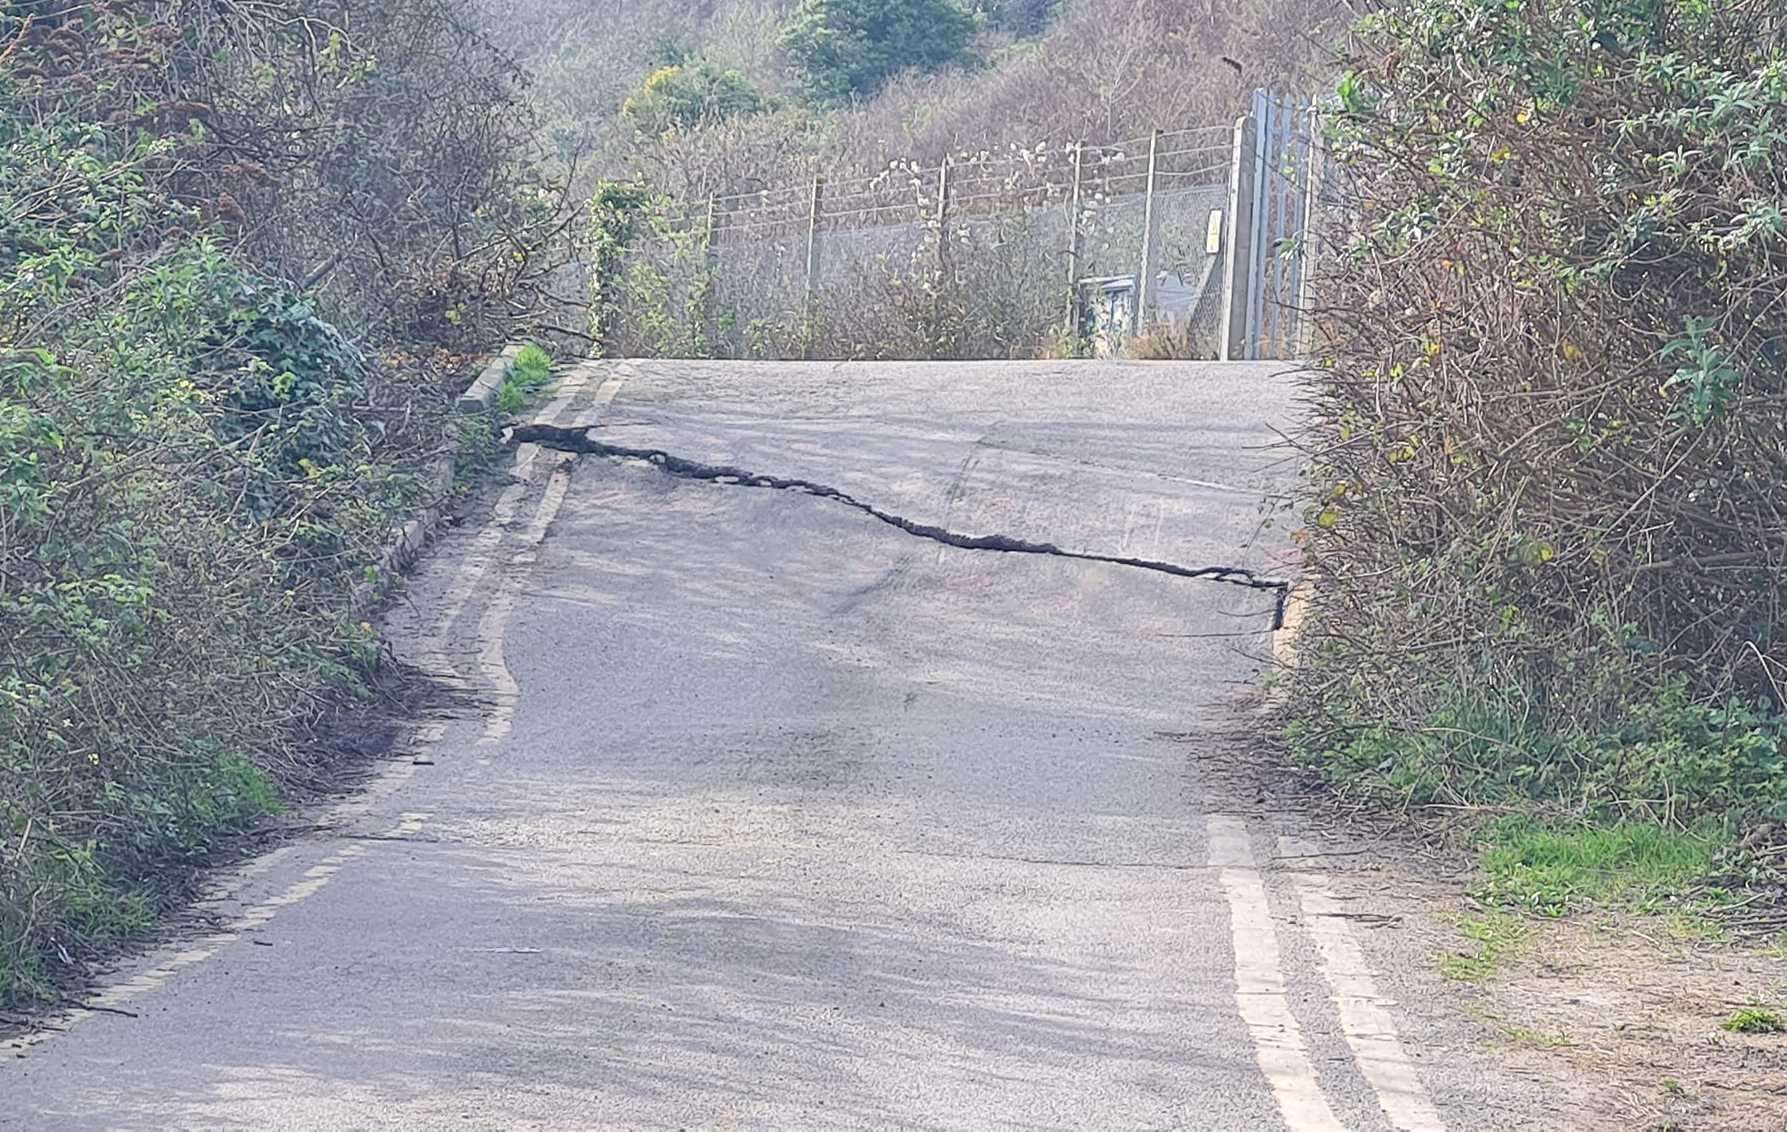 Cracks appeared on the road near the railway between Folkestone and Dover last week